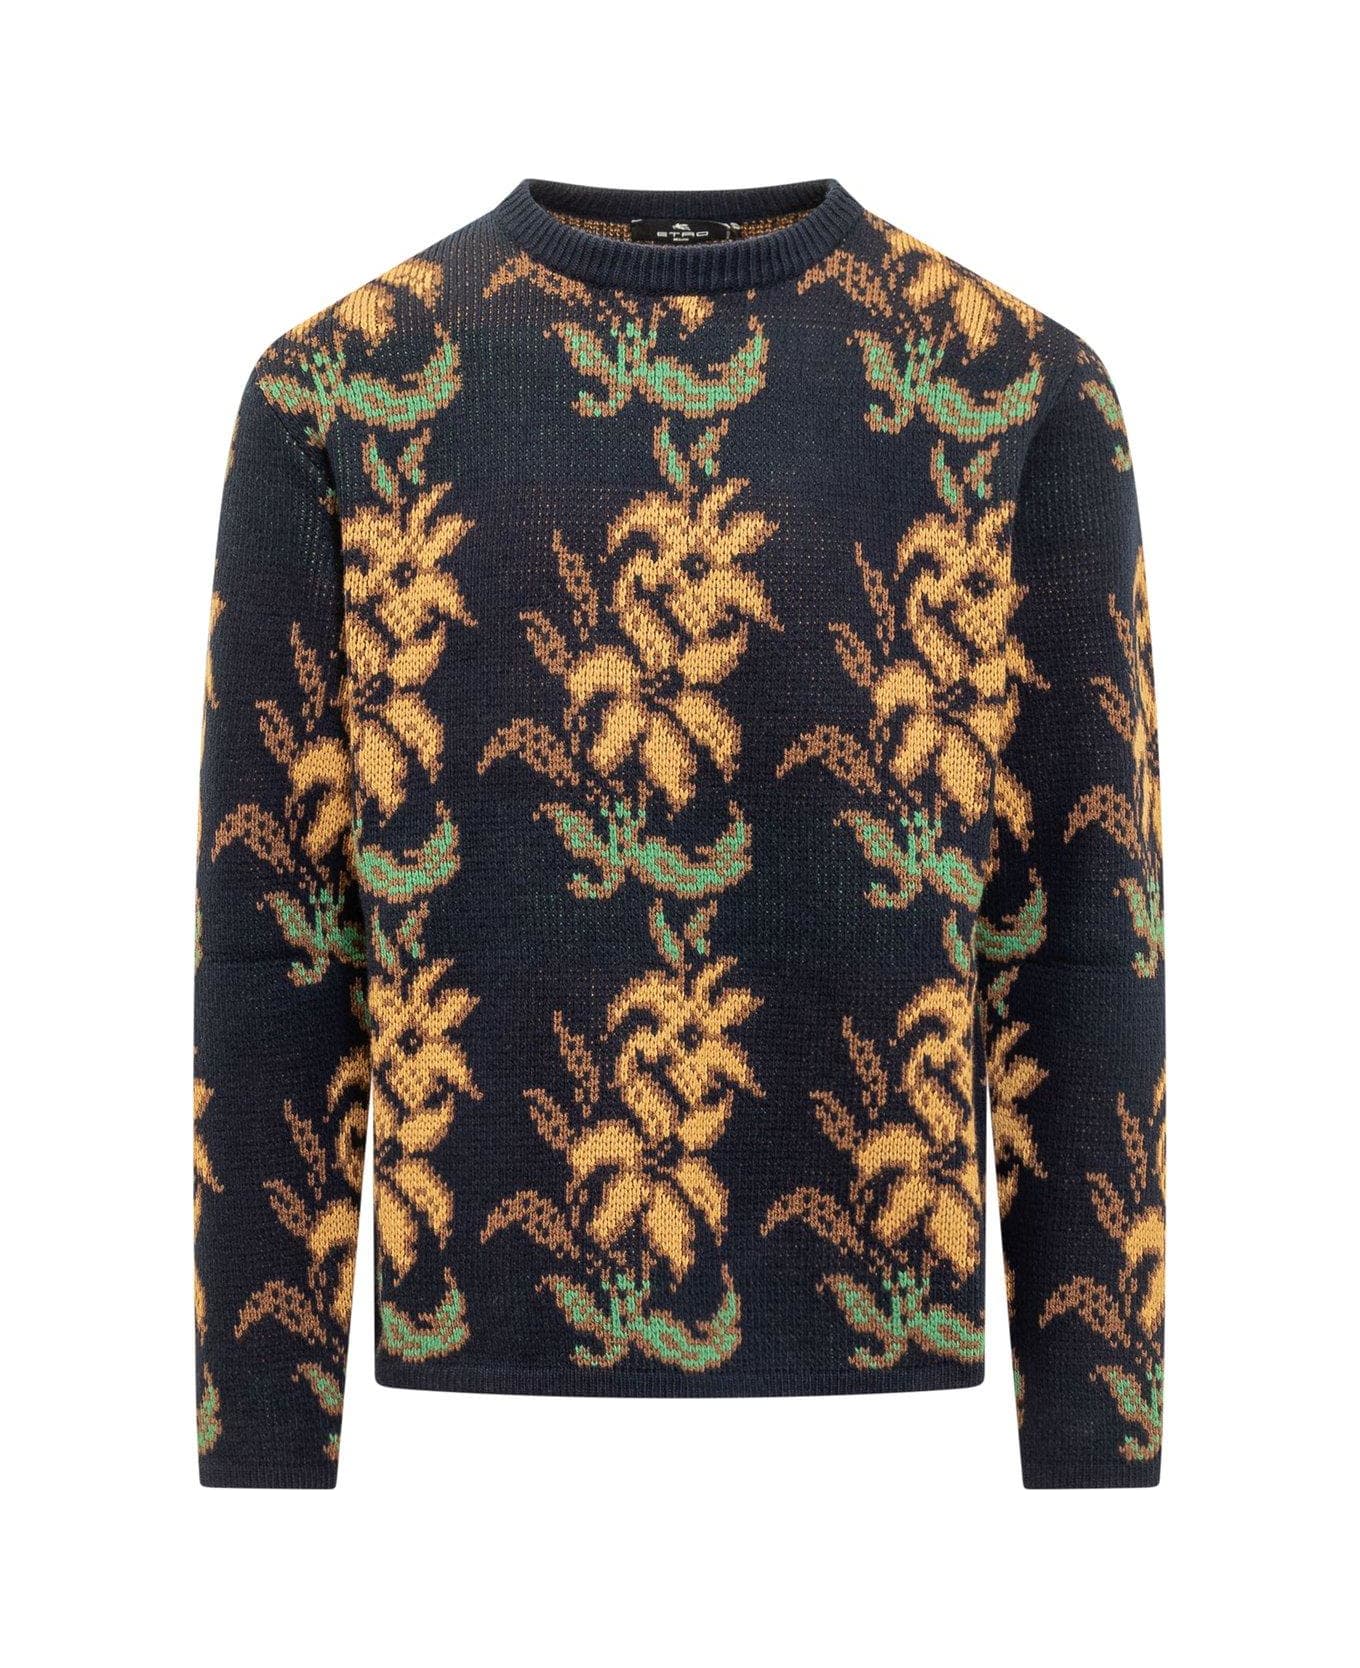 Etro Floral Intarsia Knitted Crewneck Jumper - C